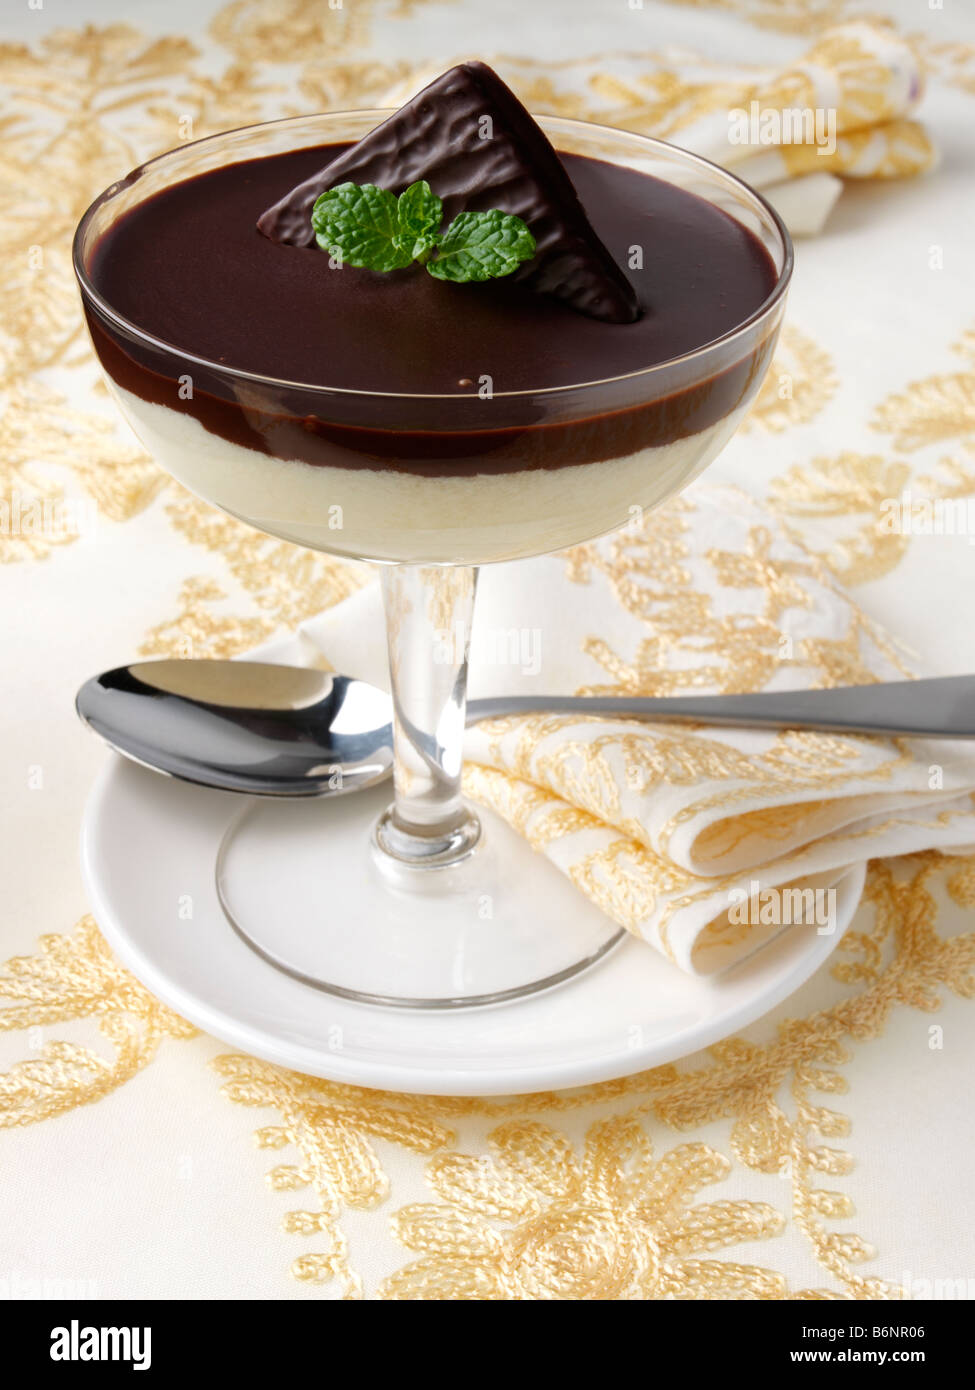 Chocolate mint mousse Stock Photo